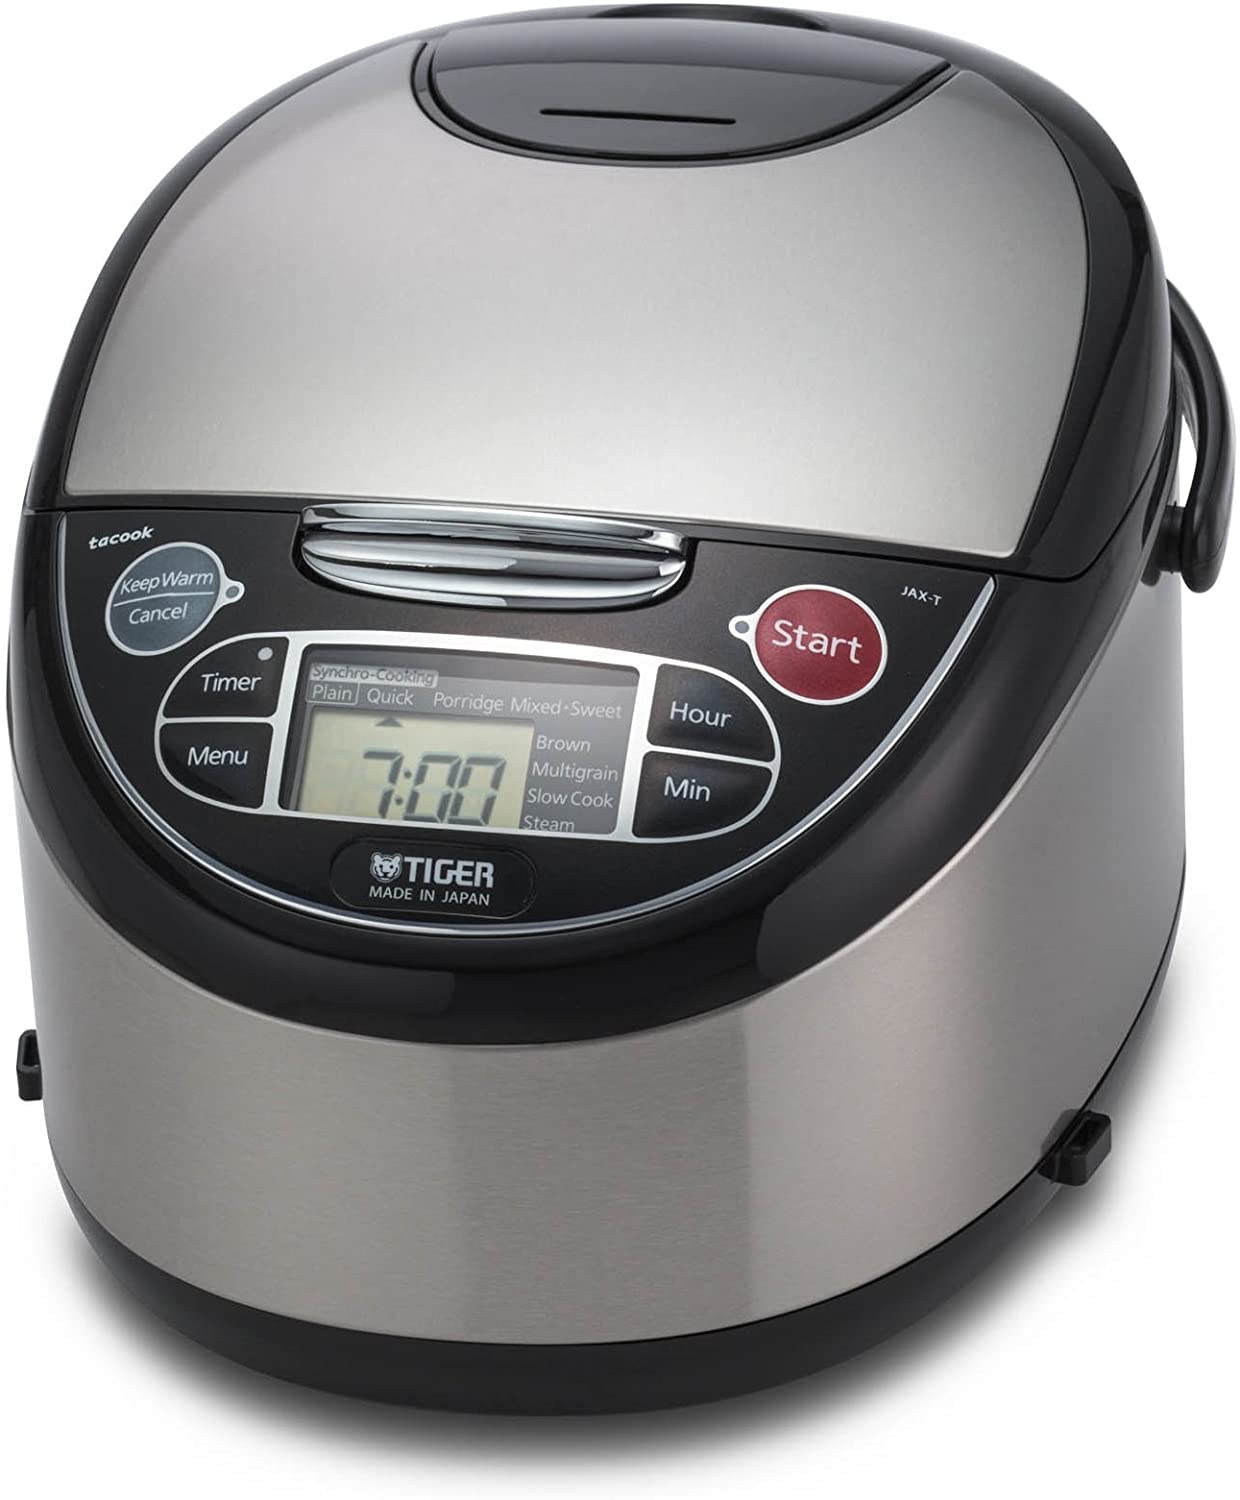 Tiger Rice Cooker: 5.5 cup, multi-function, s/s black JAX-T10U